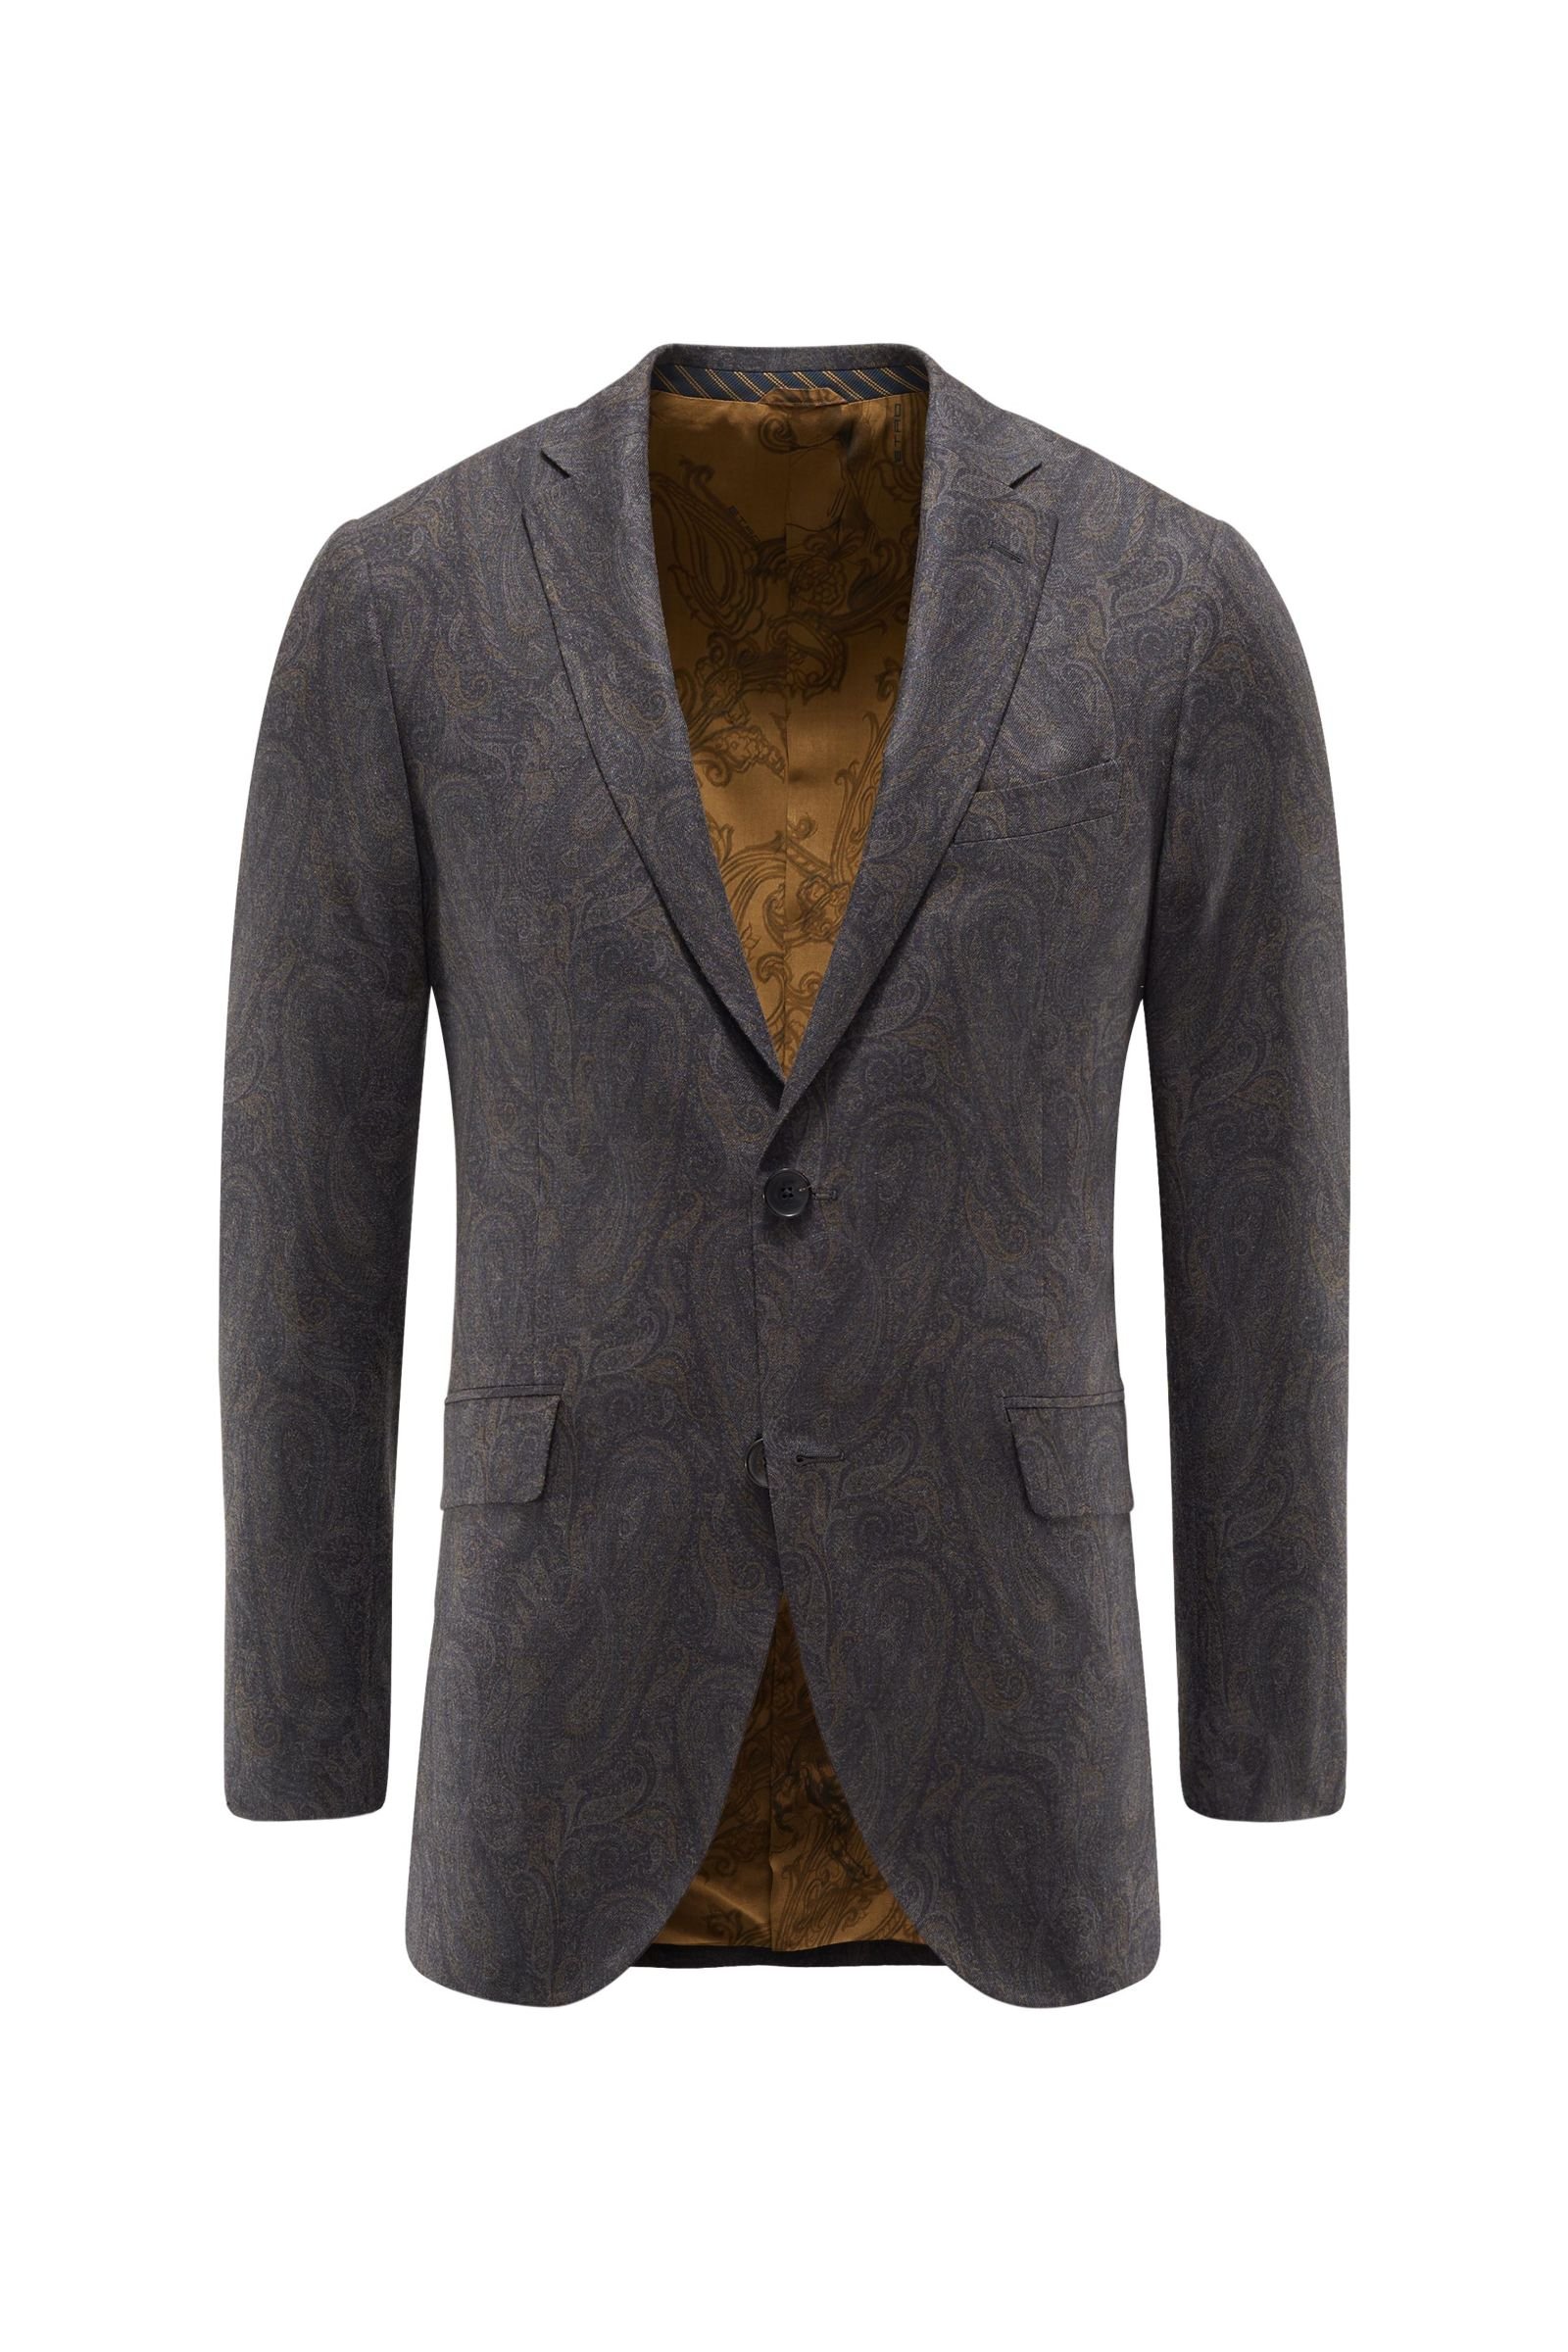 Smart-casual jacket grey patterned